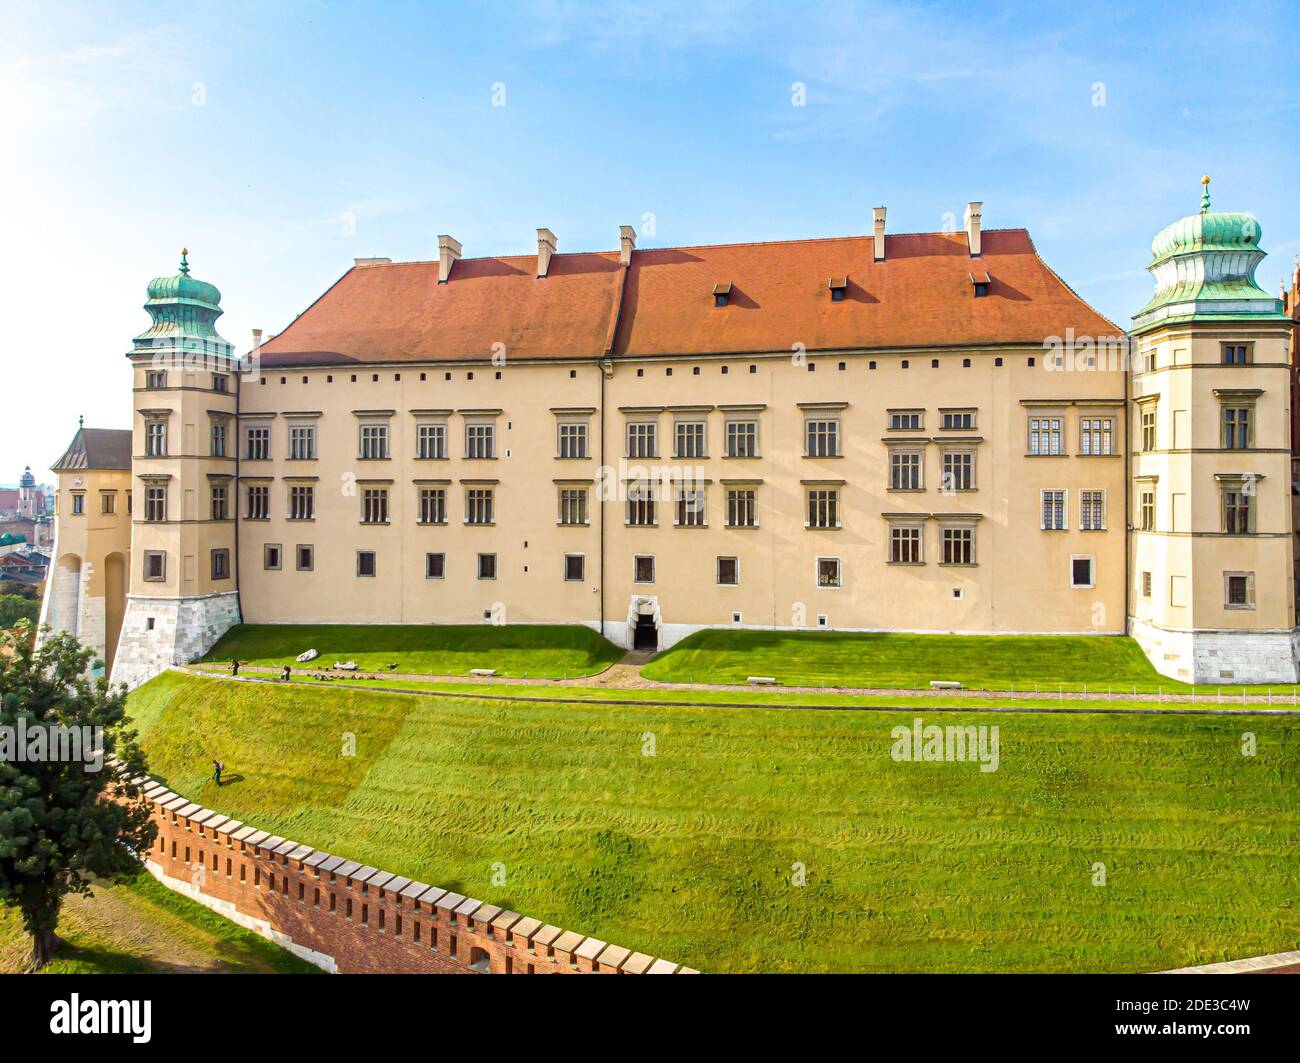 The most famous Polish castle - Wawel in Krakow in the morning, seen from a bird's perspective Stock Photo